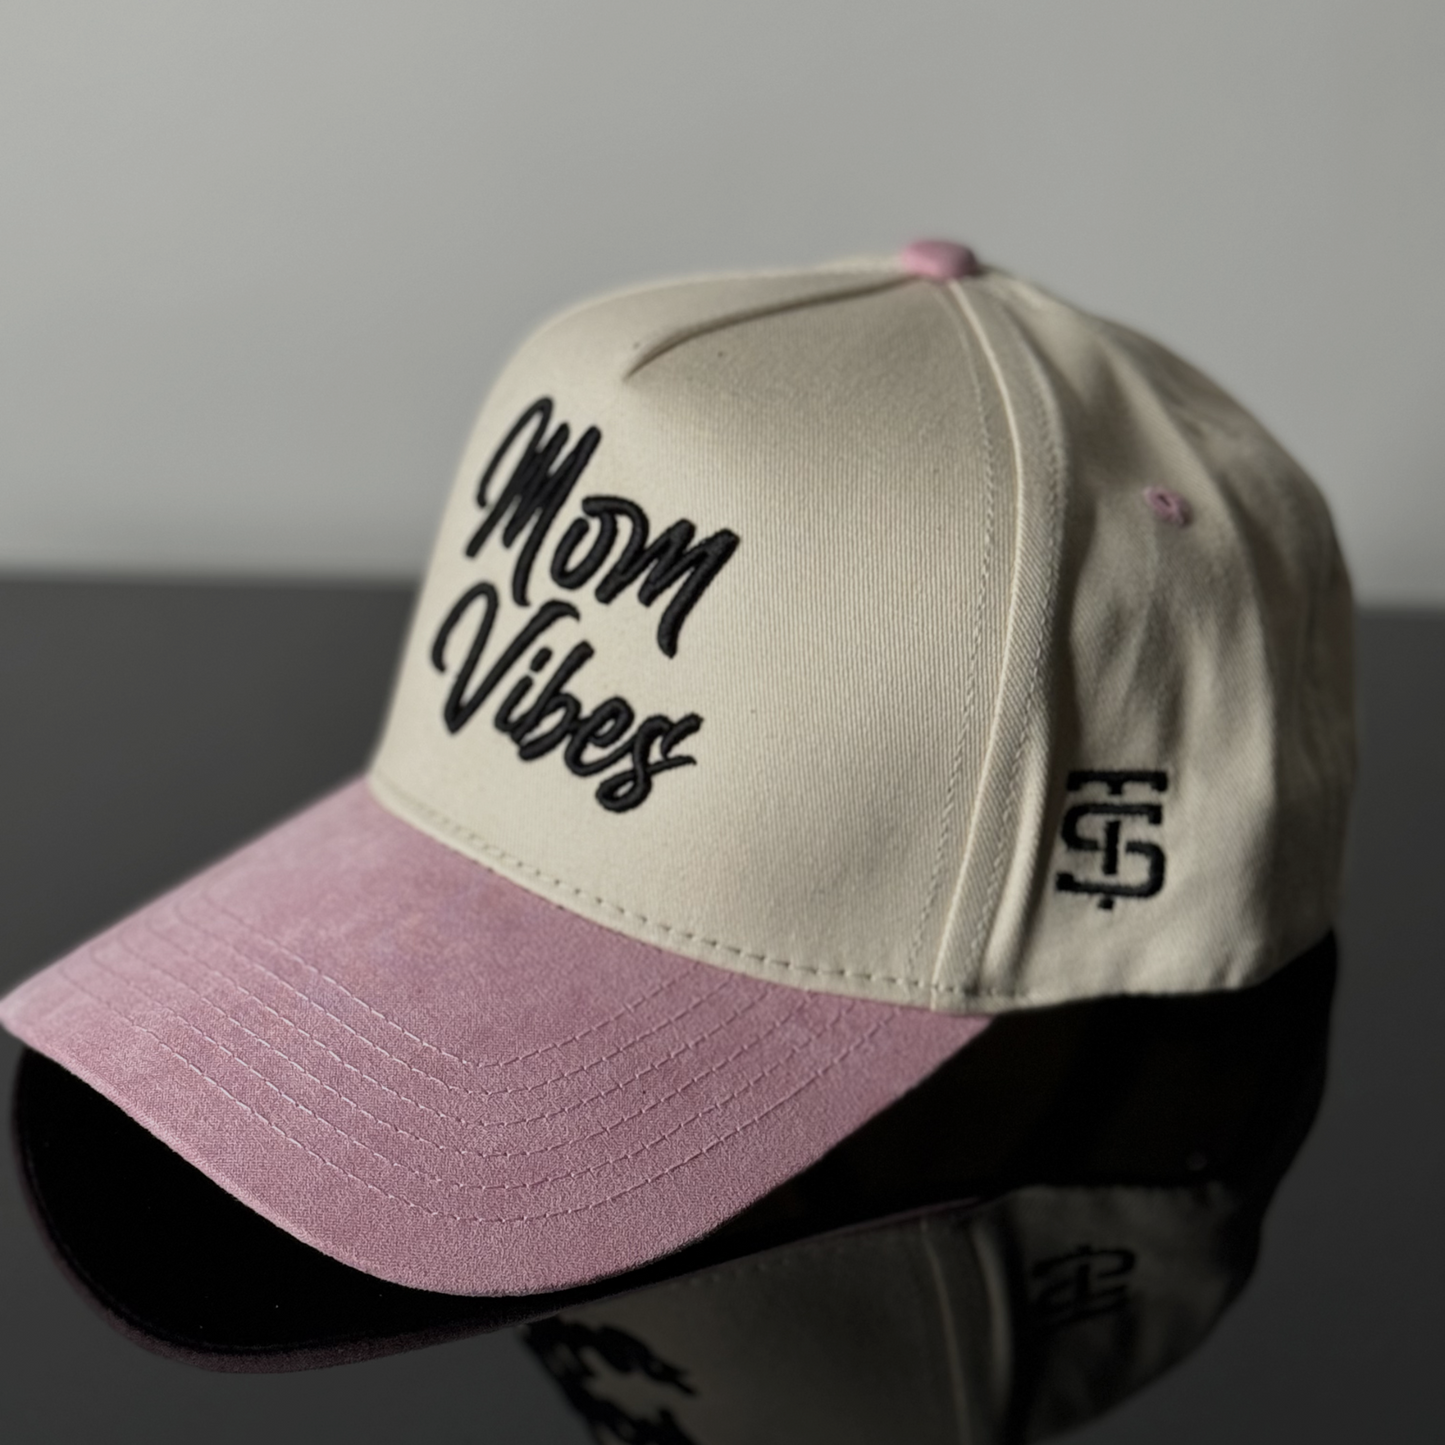 Mom Vibes (Limited Edition)